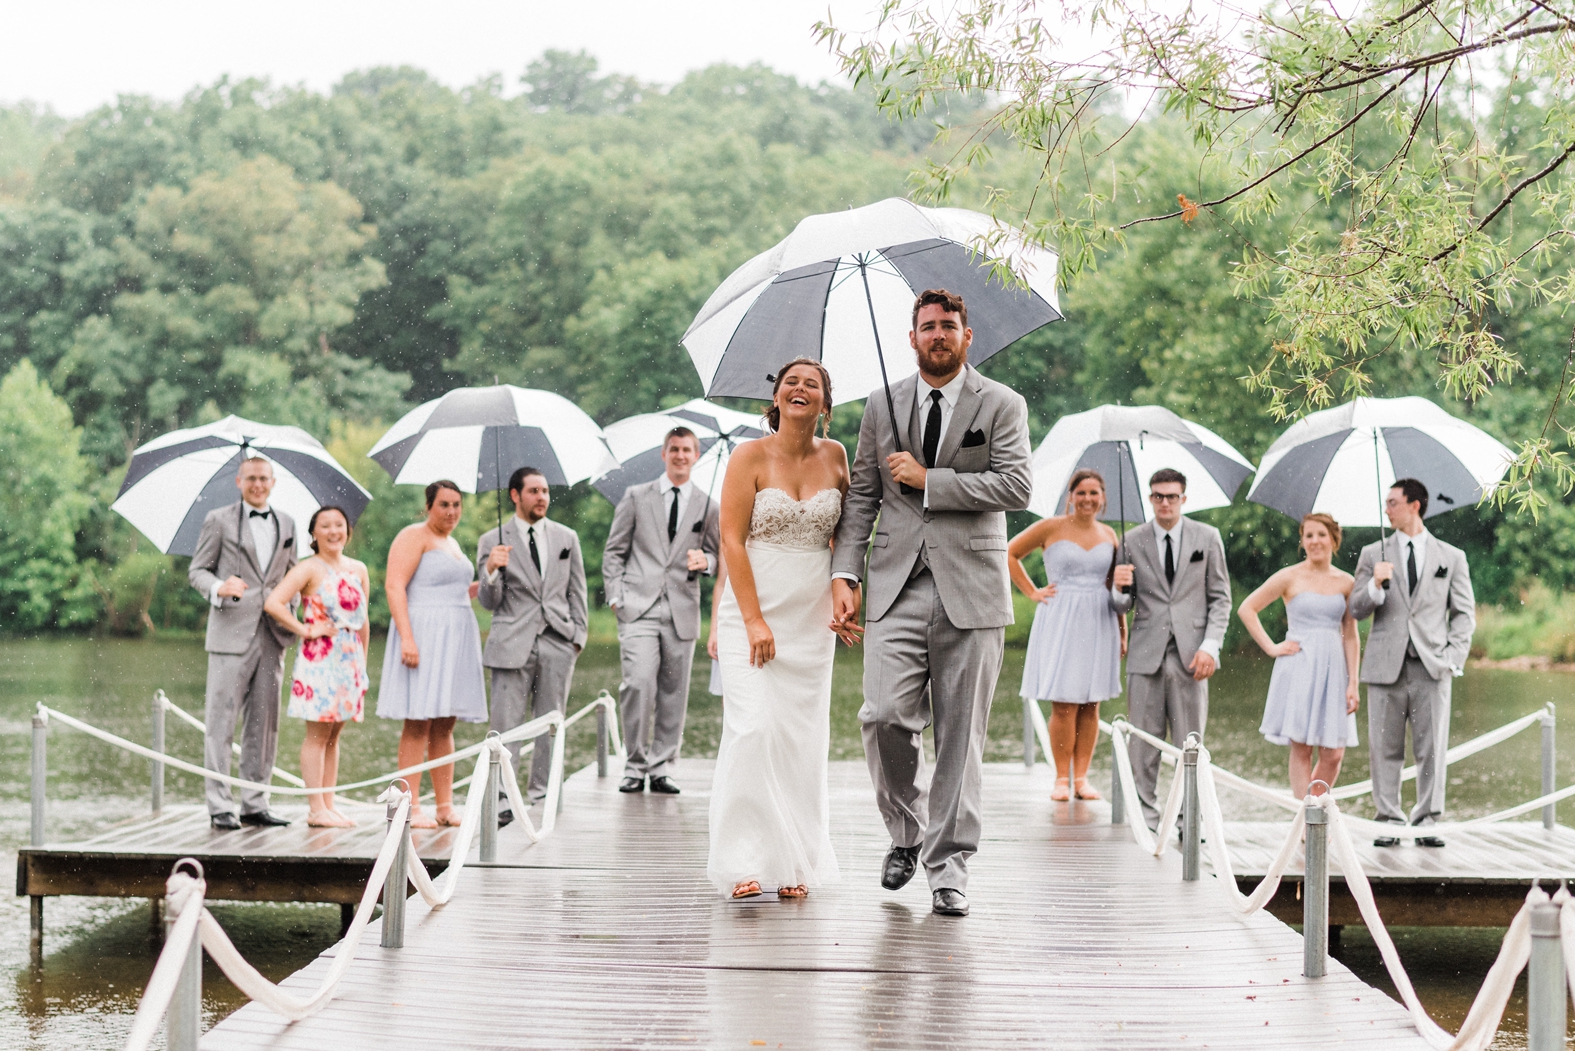 Wedding party on dock in rain with black and white umbrellas.